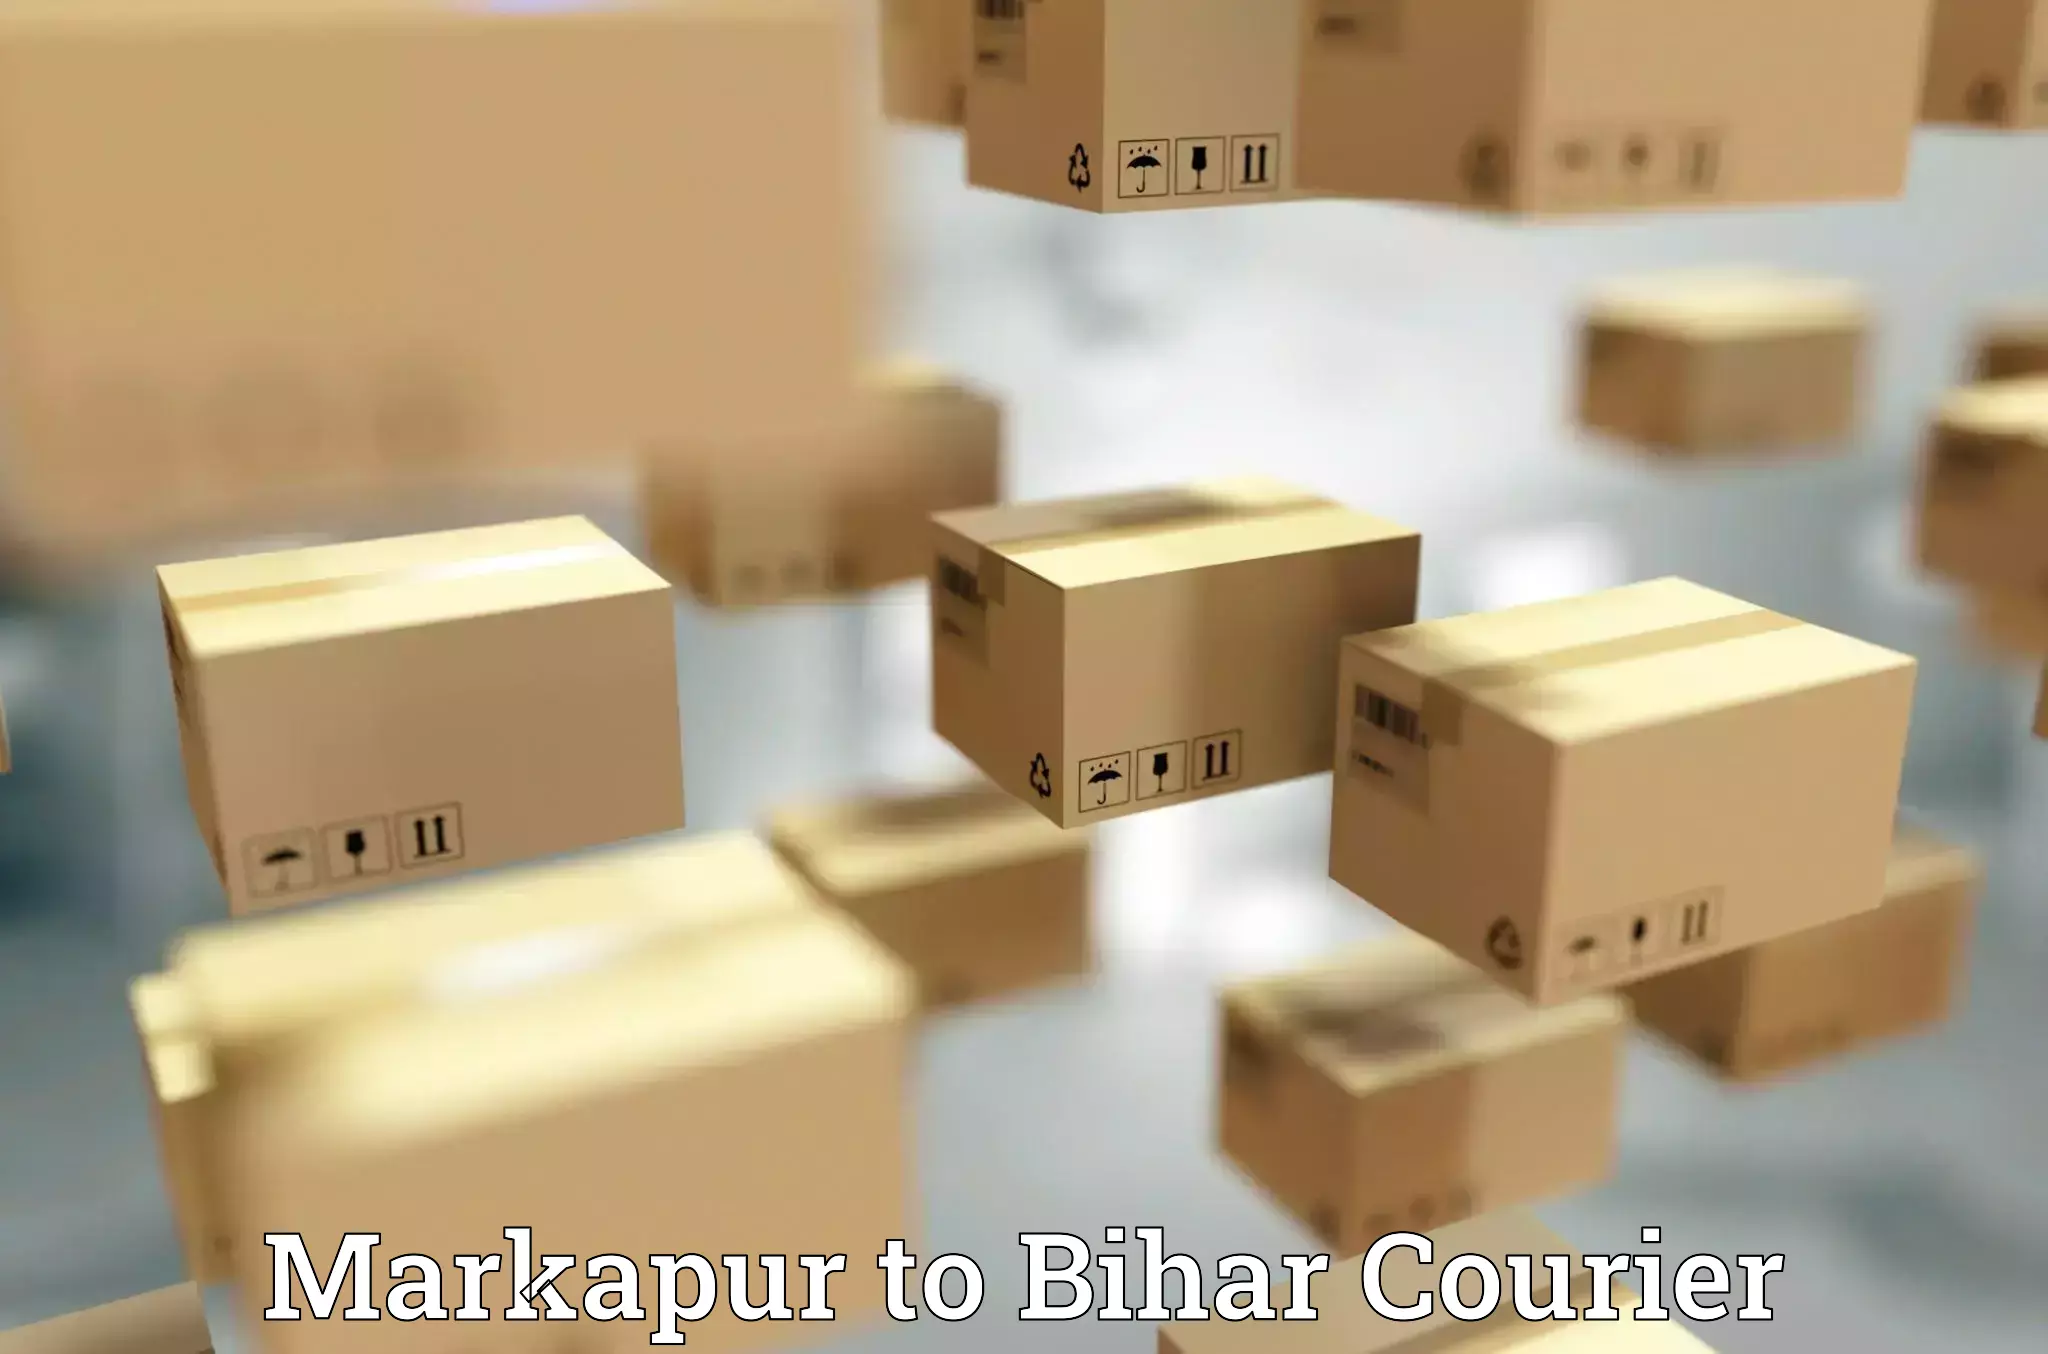 Express delivery capabilities in Markapur to Bihar